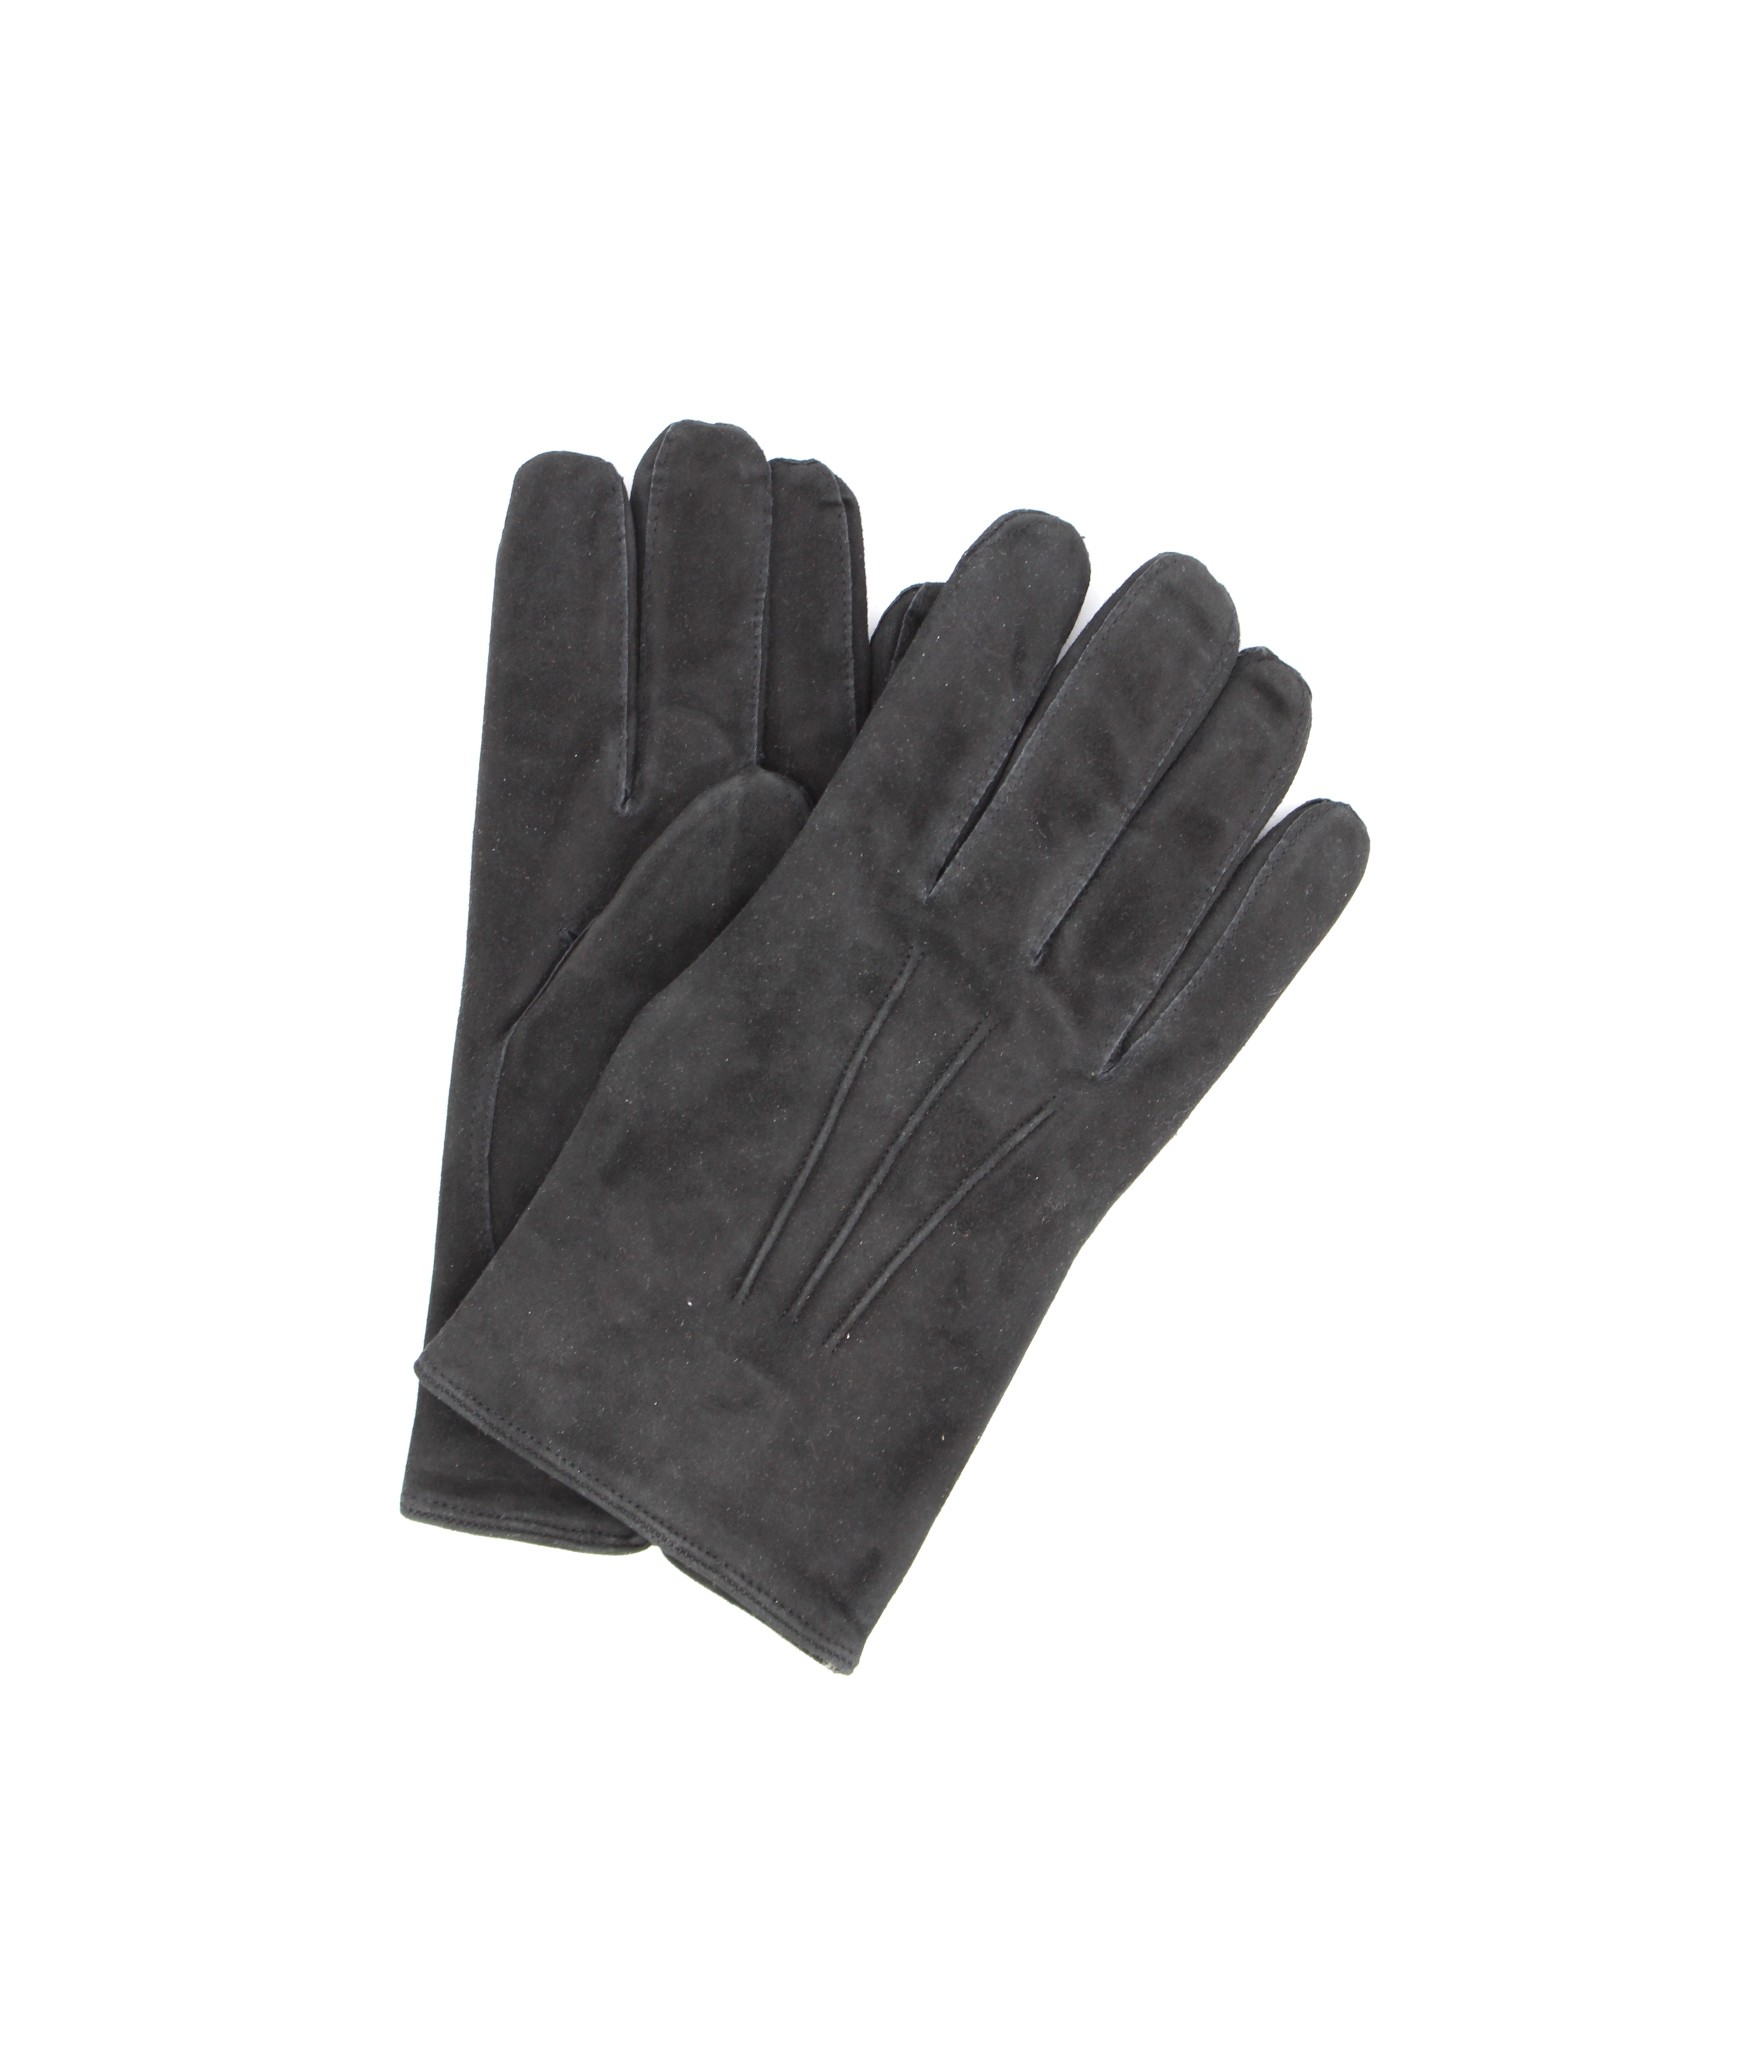 Uomo Classic Suede Suede Nappa leather gloves cashmere lined